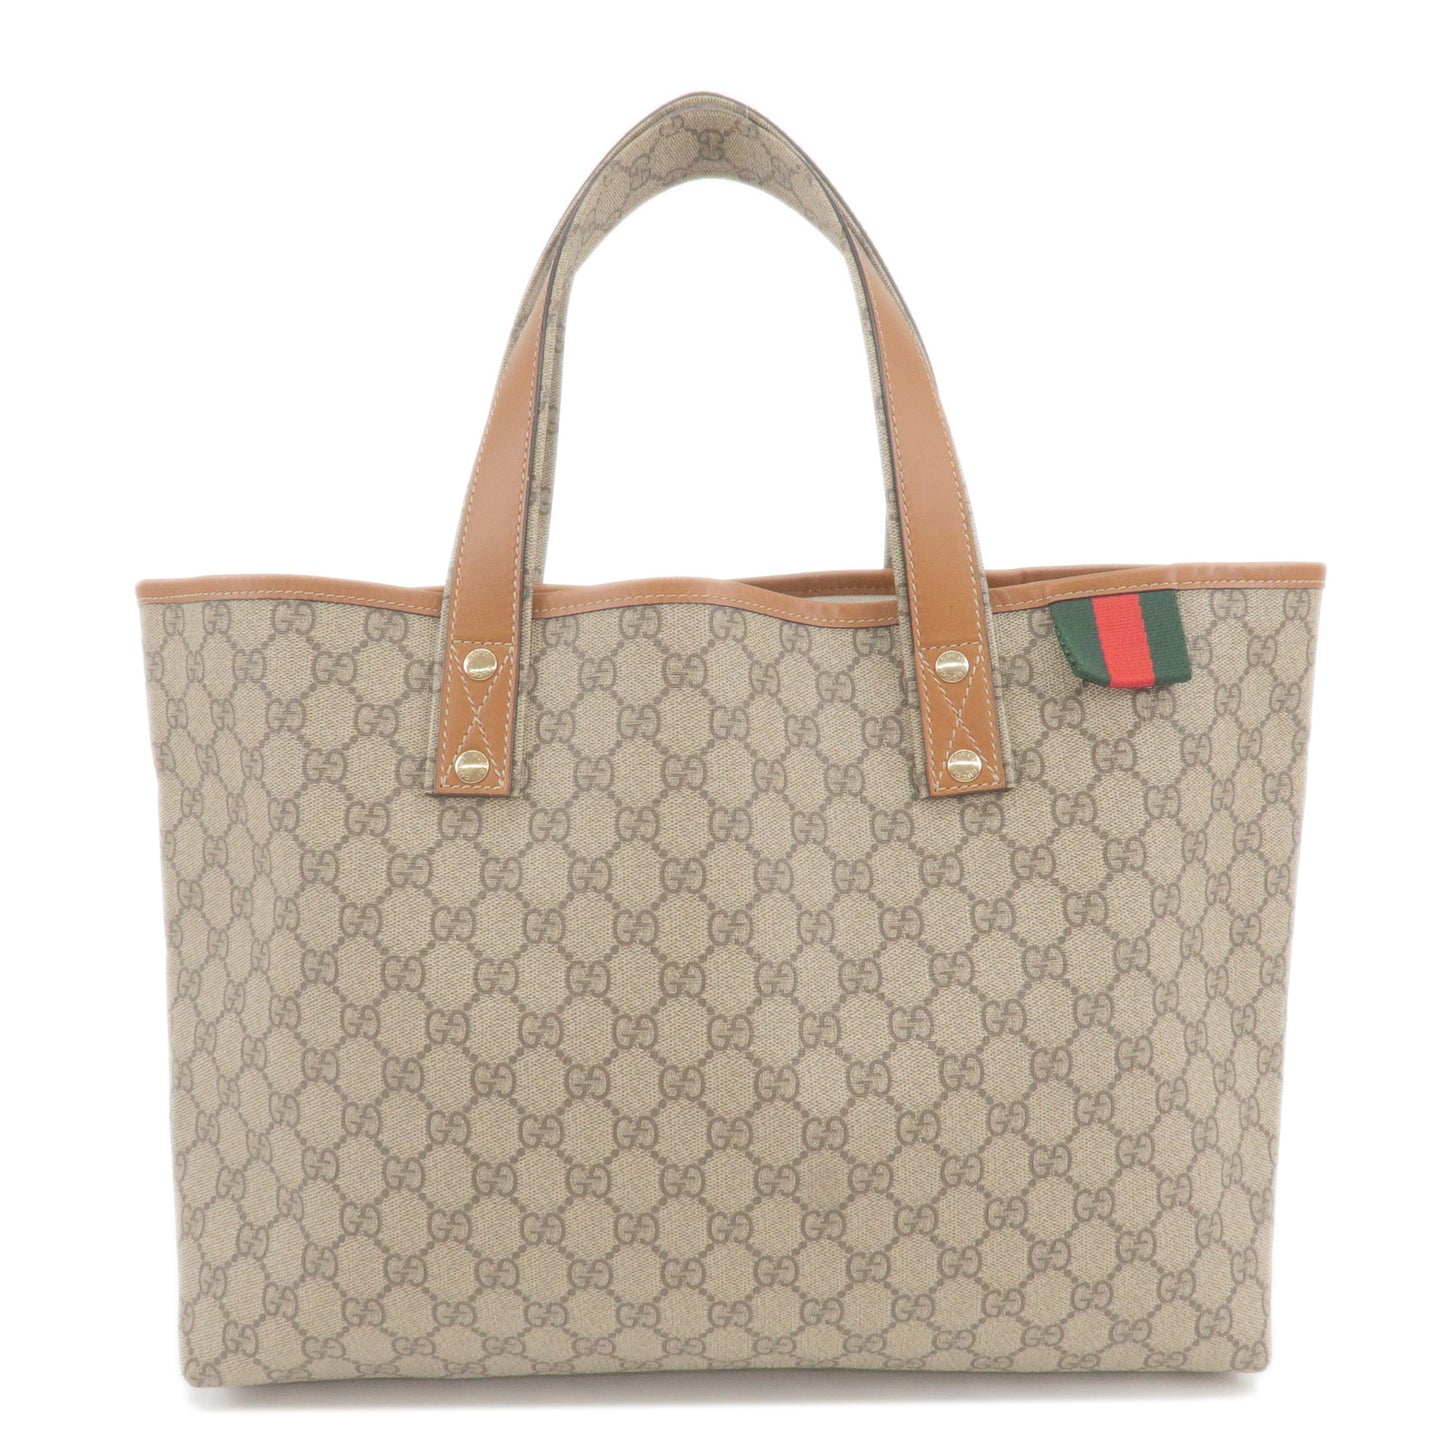 GUCCI-Sherry-GG-Supreme-Leather-Tote-Bag-Brown-Beige-211134